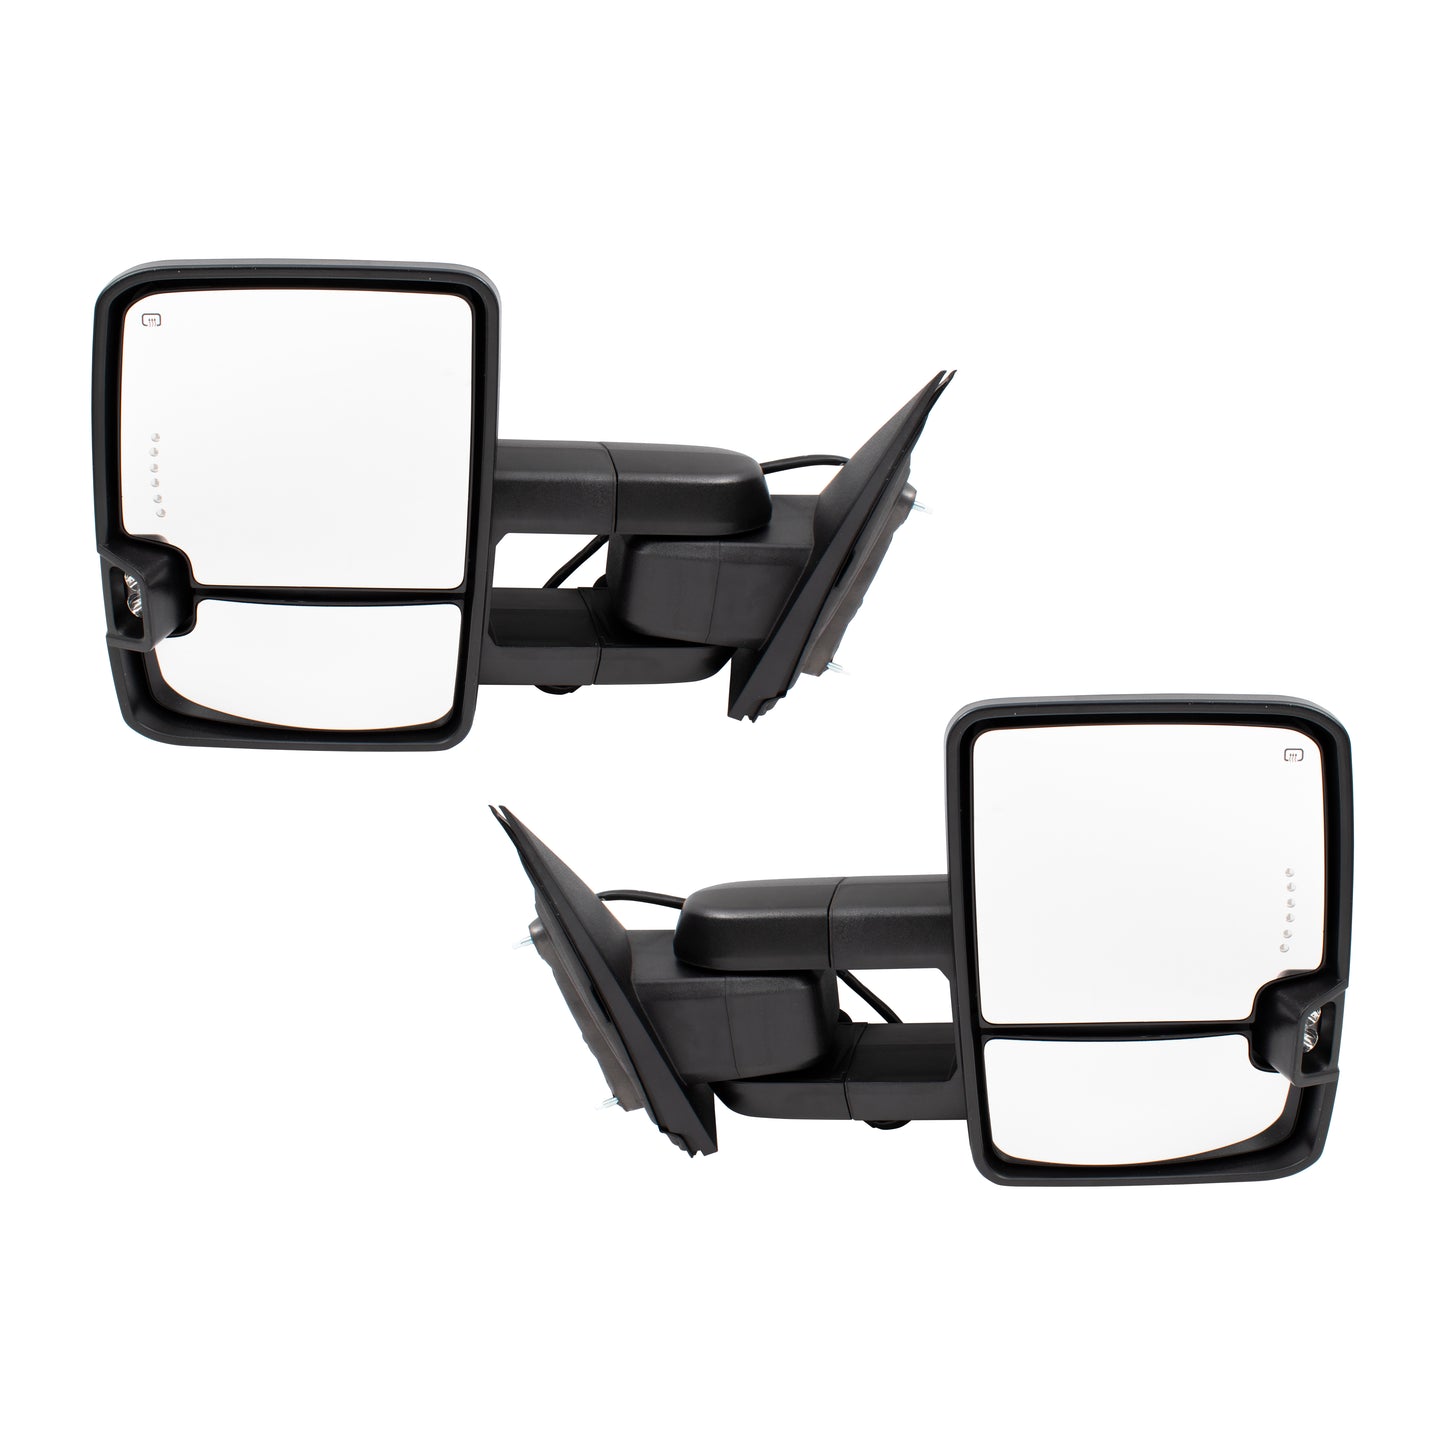 Brock Replacement Performance Upgrade Tow Mirrors Power Folding Heated Telescopic Dual Arms Compatible with 2014-2018 Silverado Sierra Pickup Truck